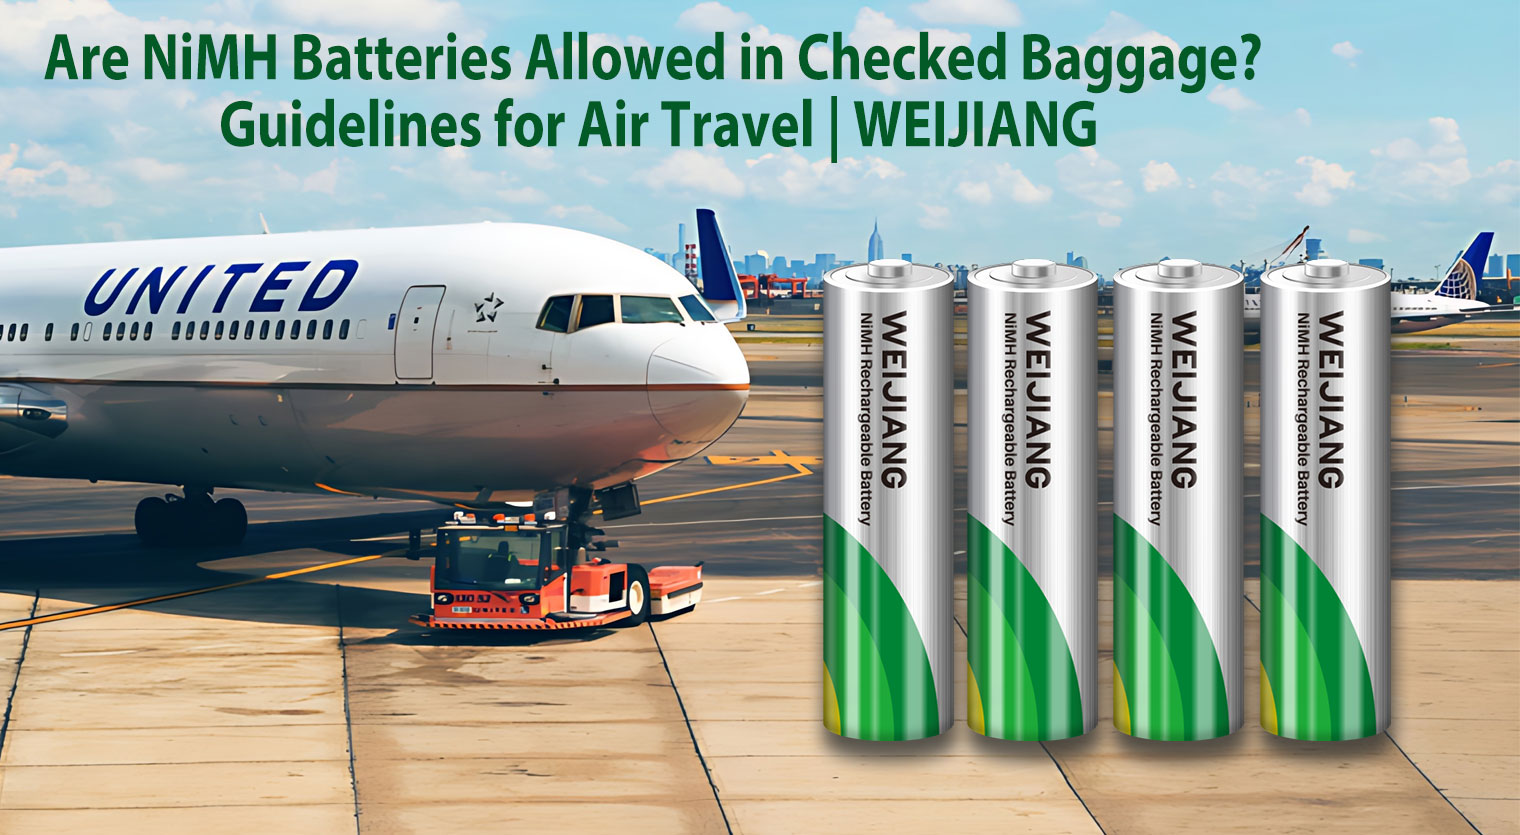 Are-NiMH-Batteries-Allowed-in-Checked-Baggage